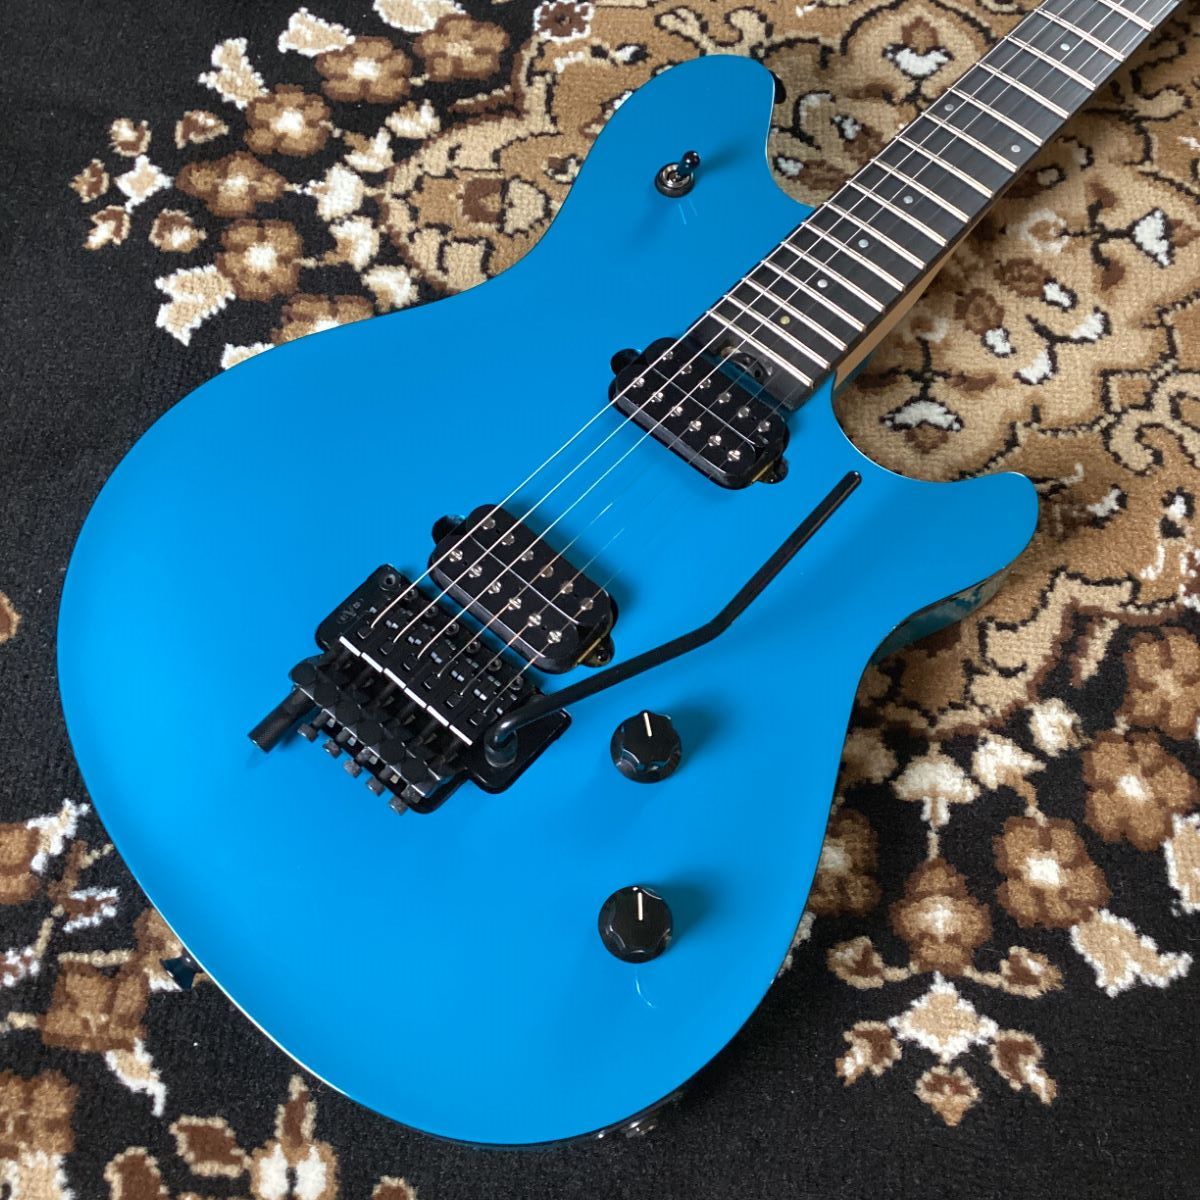 EVH Wolfgang special Miami blue機材整理のため出品します